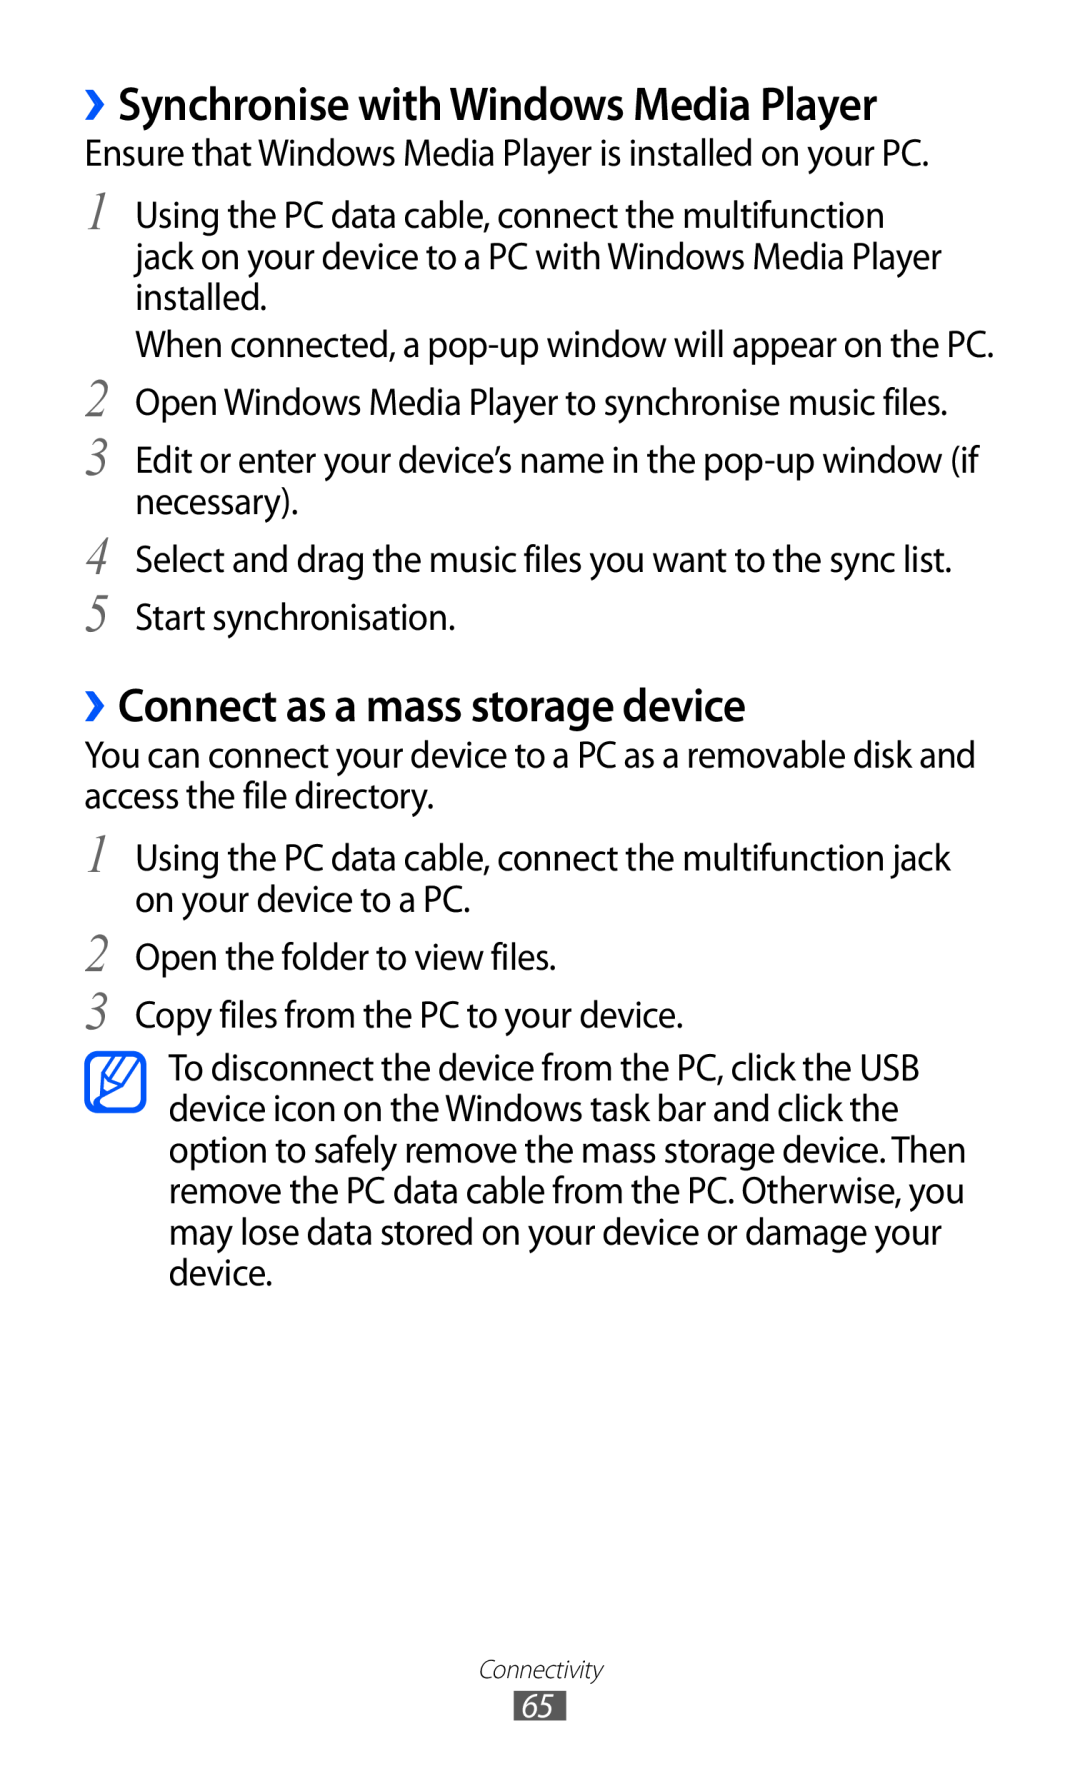 Samsung GT-P7510 user manual ››Synchronise with Windows Media Player, ››Connect as a mass storage device 